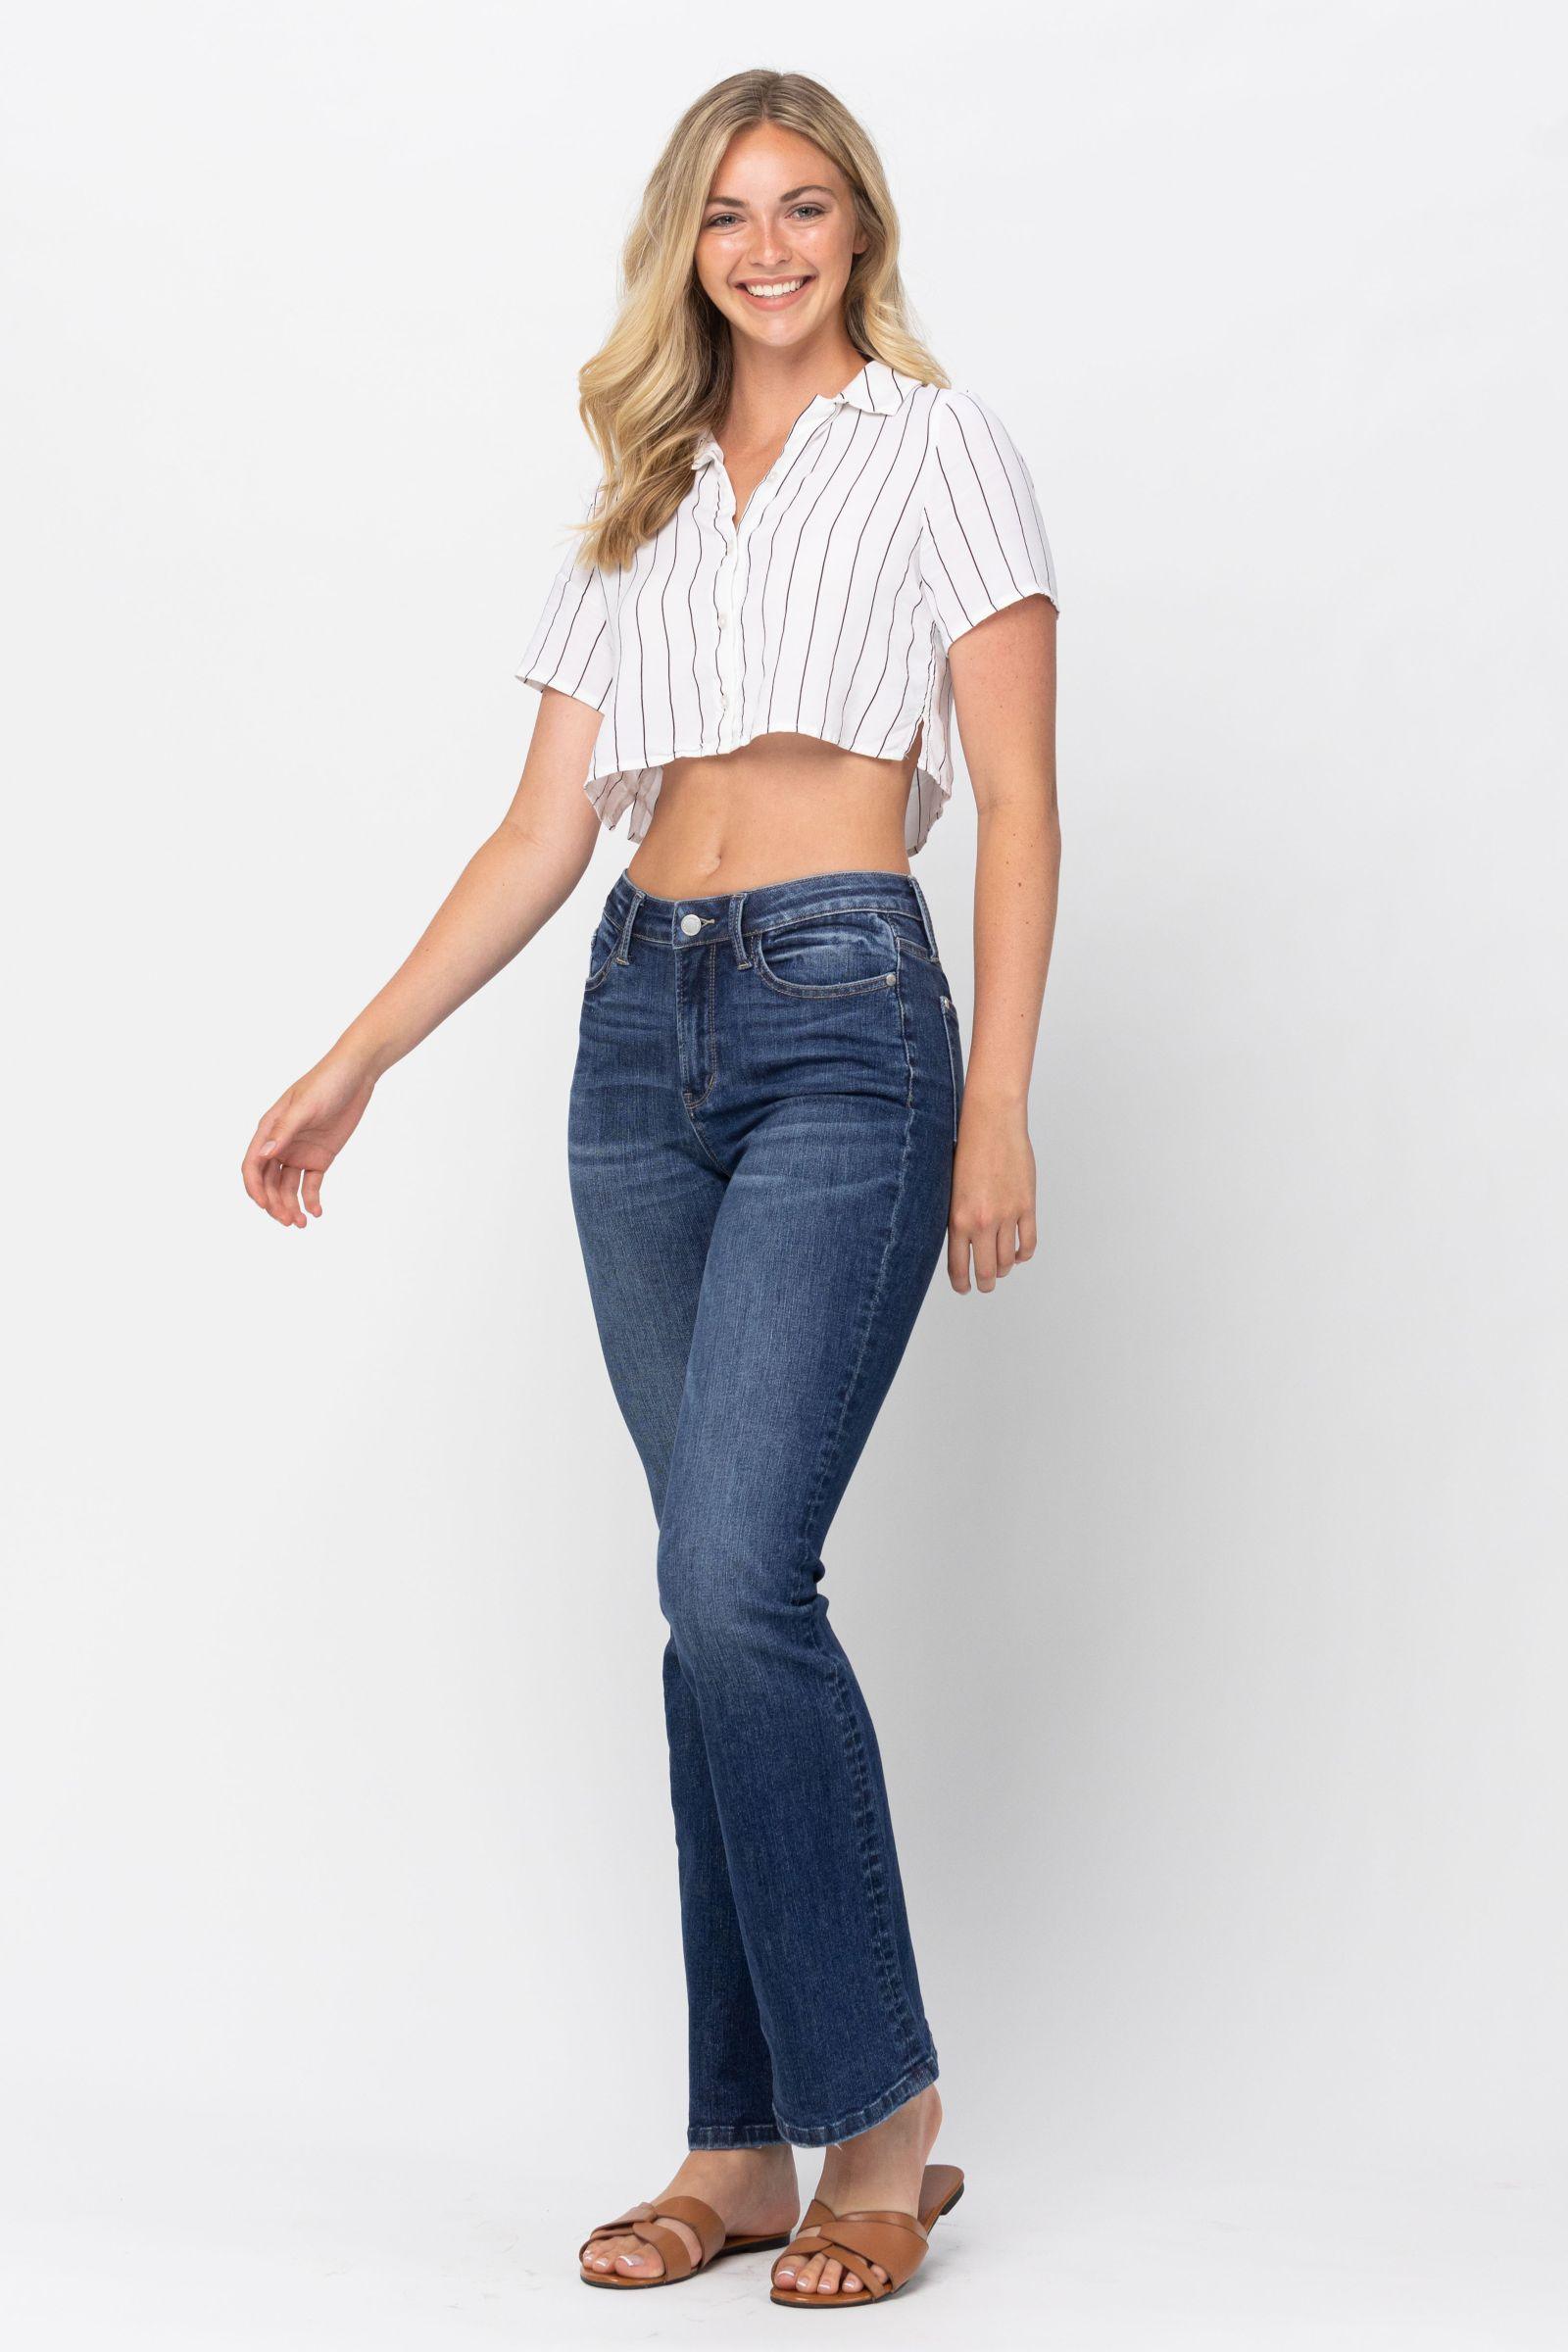 Judy Blue Midrise Bootcut Jeans - Strawberry Moon Boutique